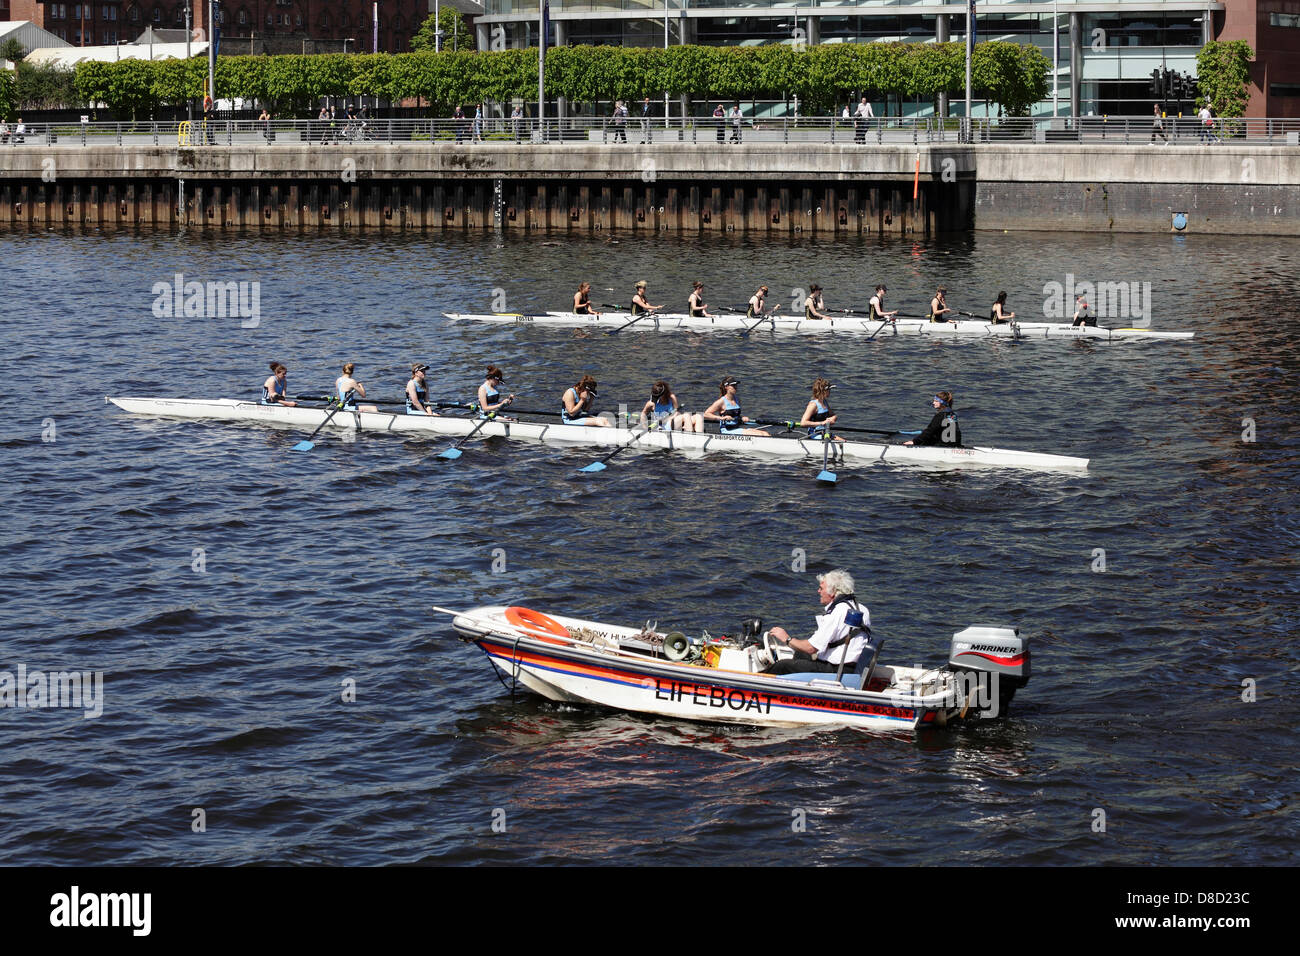 Glasgow, Scotland, UK, Saturday, 25th May, 2013. Participants line up at the start of the 1st VIII female Scottish Boat Race between the University of Glasgow in black vests and University of Edinburgh in blue vests on the River Clyde at the Broomielaw in the city centre Stock Photo